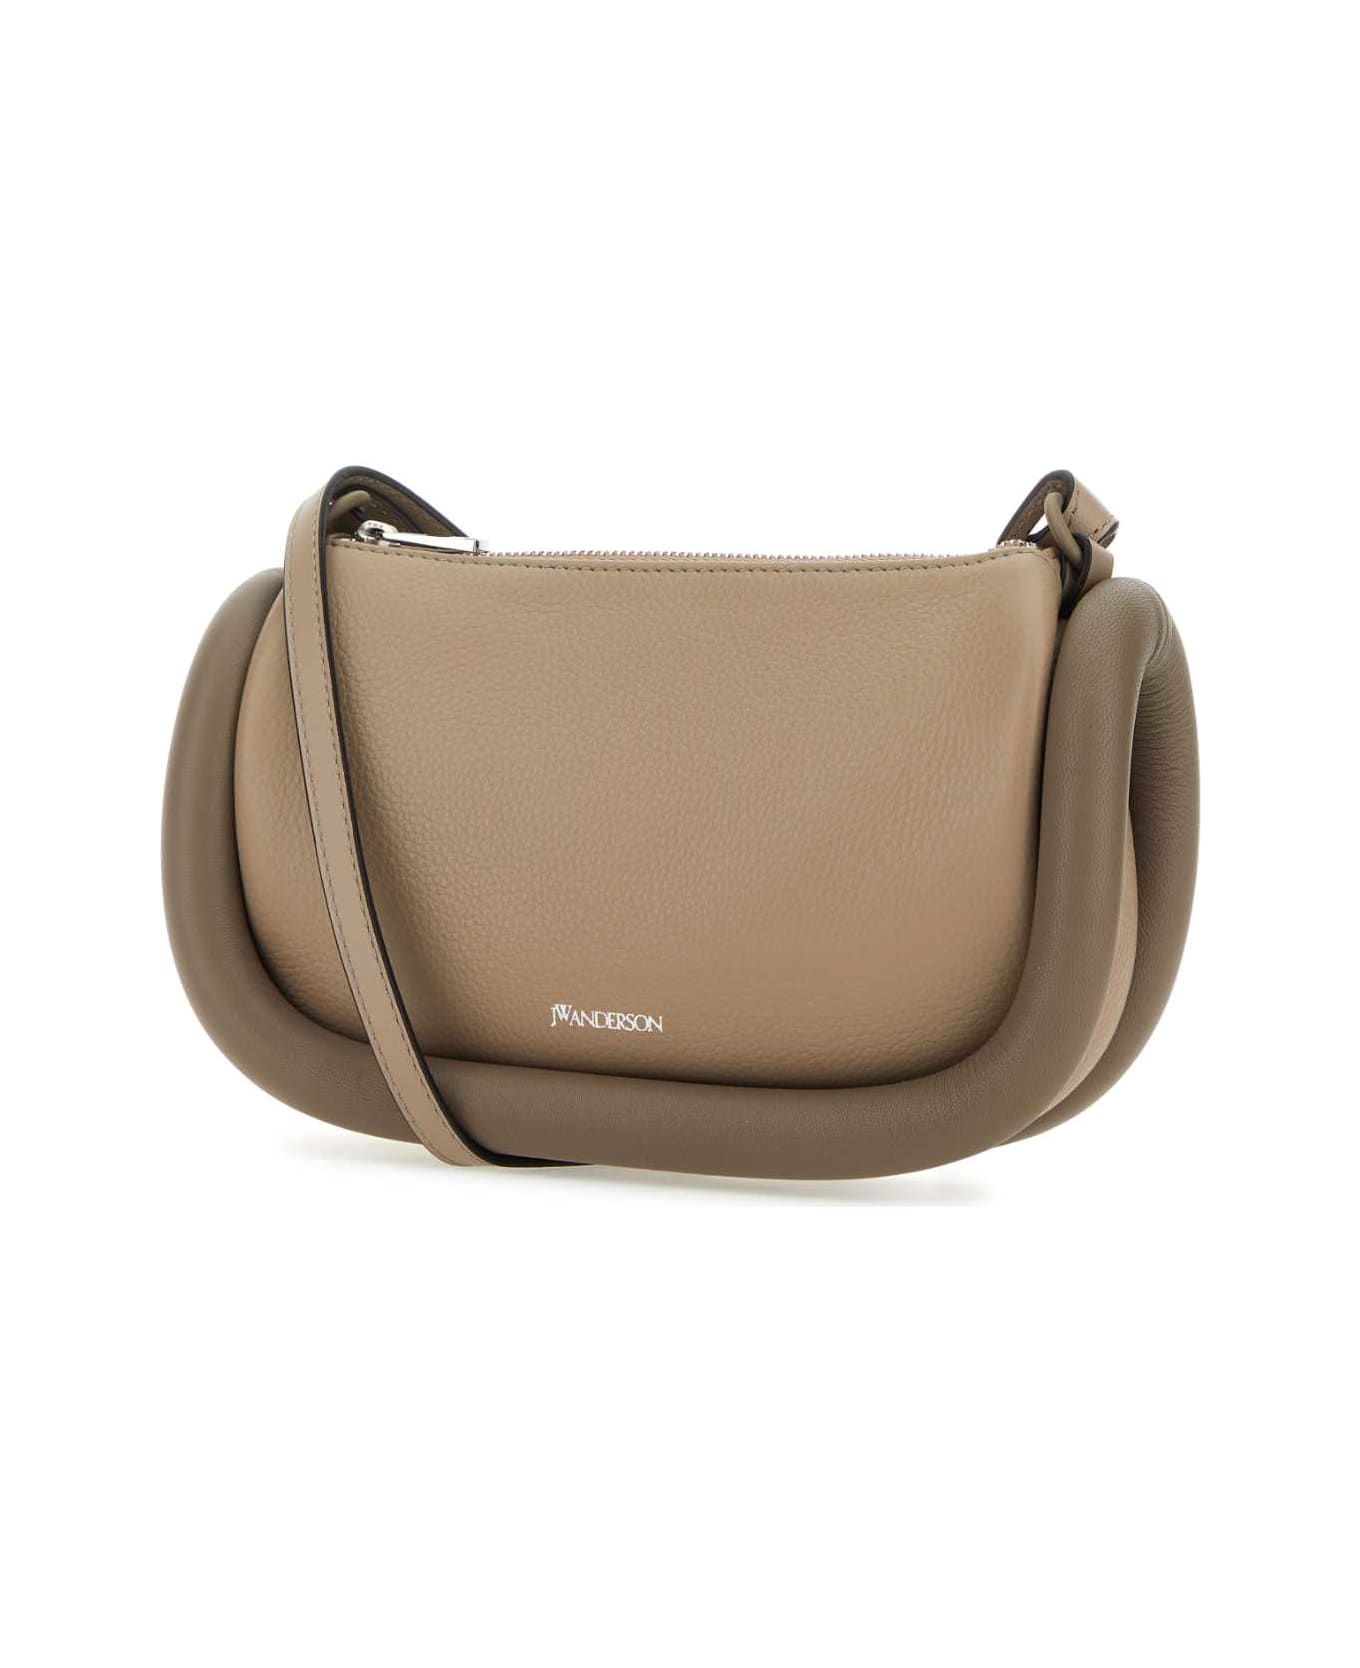 J.W. Anderson Cappuccino Leather The Bumper 12 Crossbody Bag - TAUPE